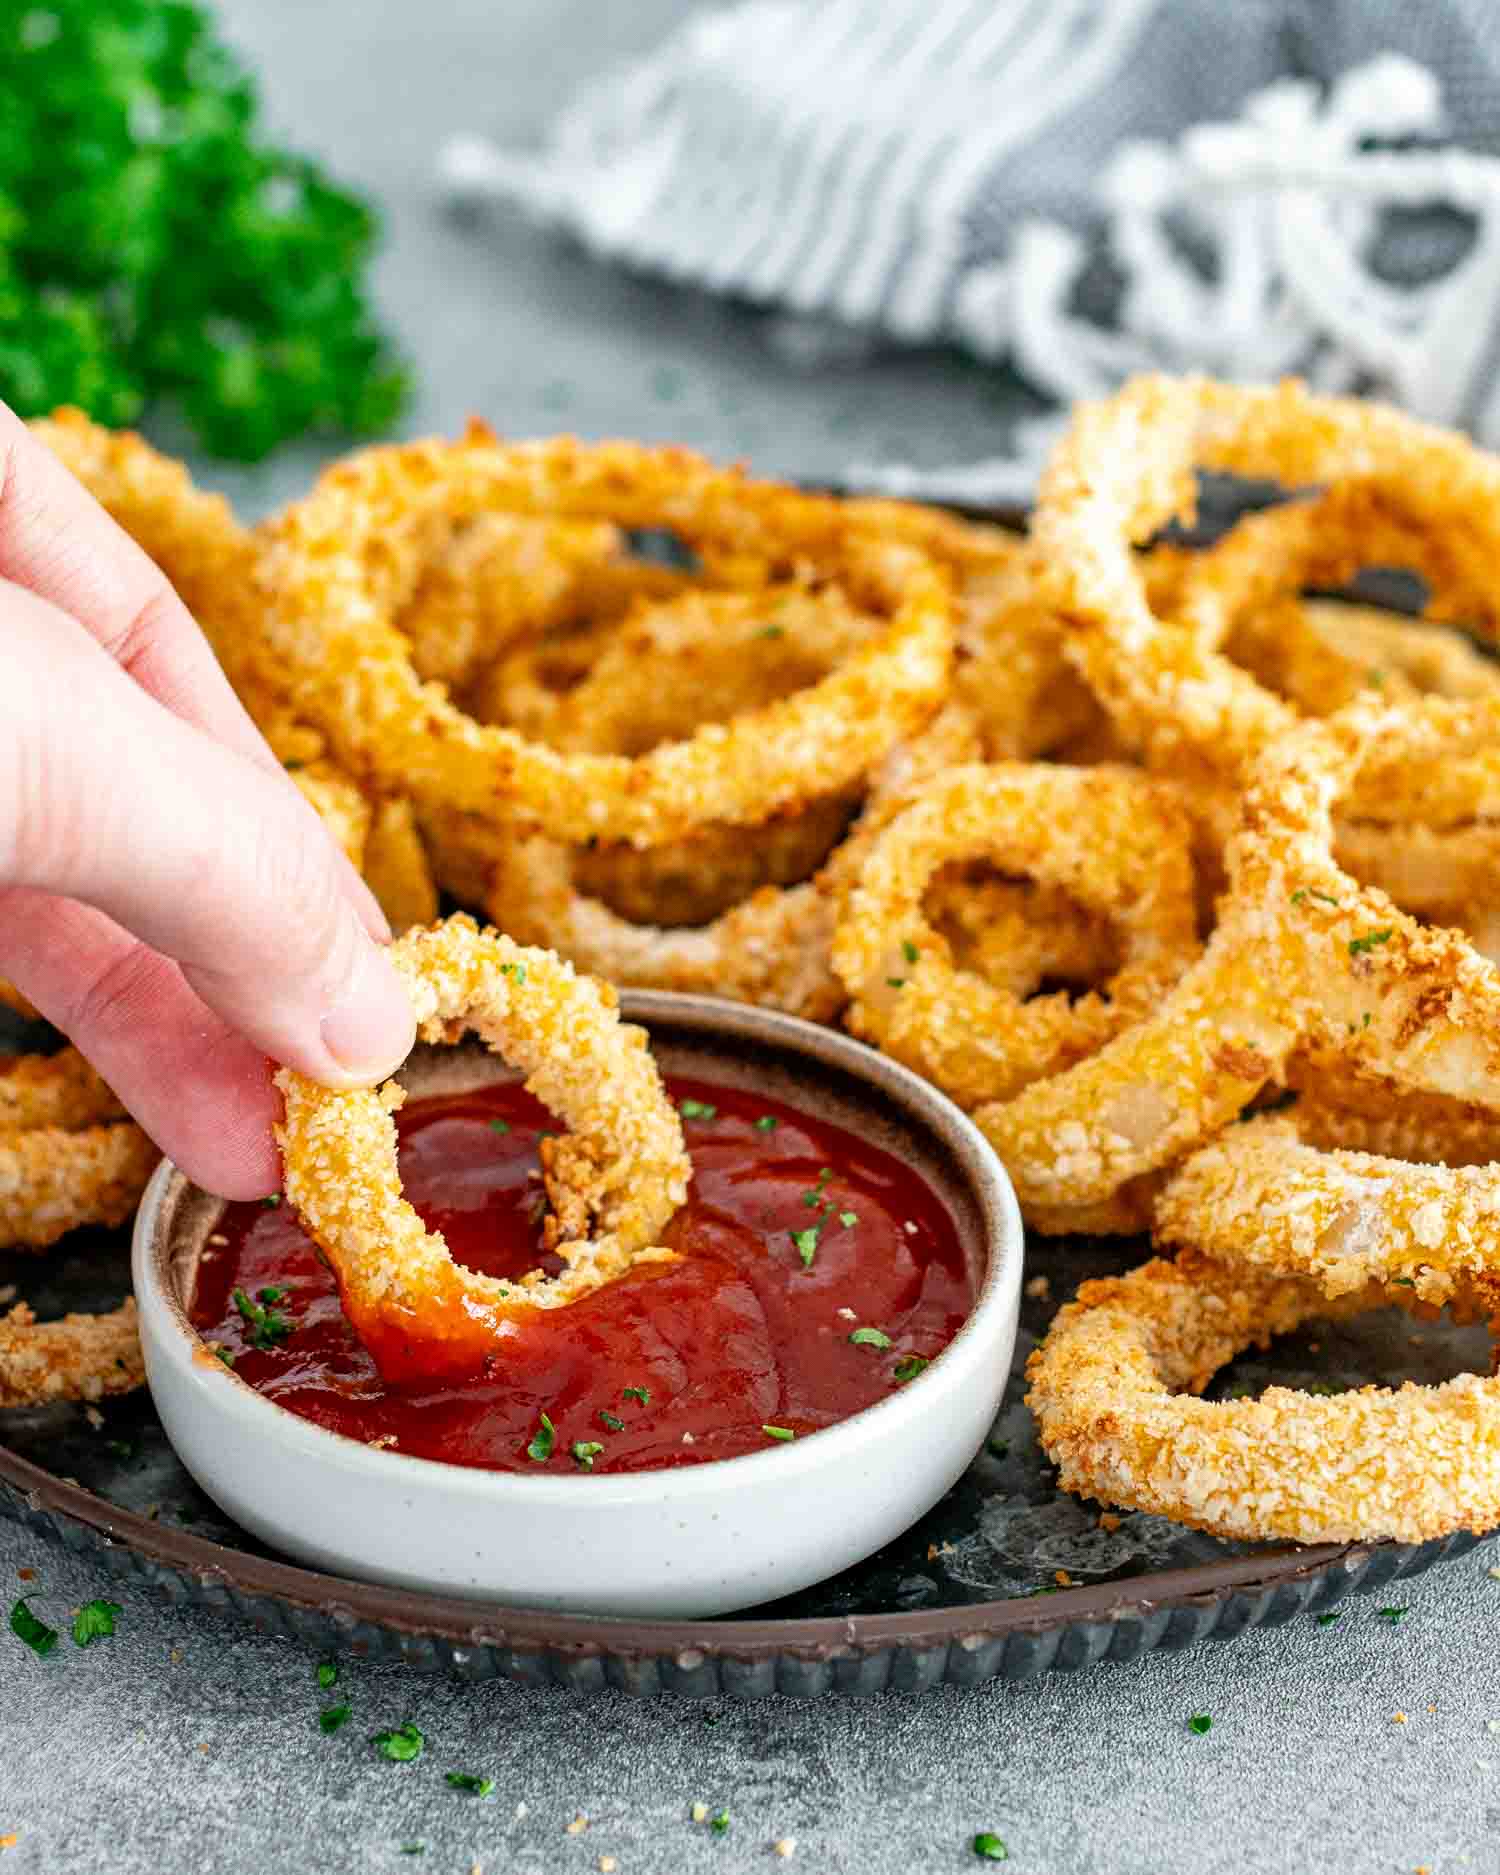 freshly made onion rings in the air fryer on a metal plate with ketchup.